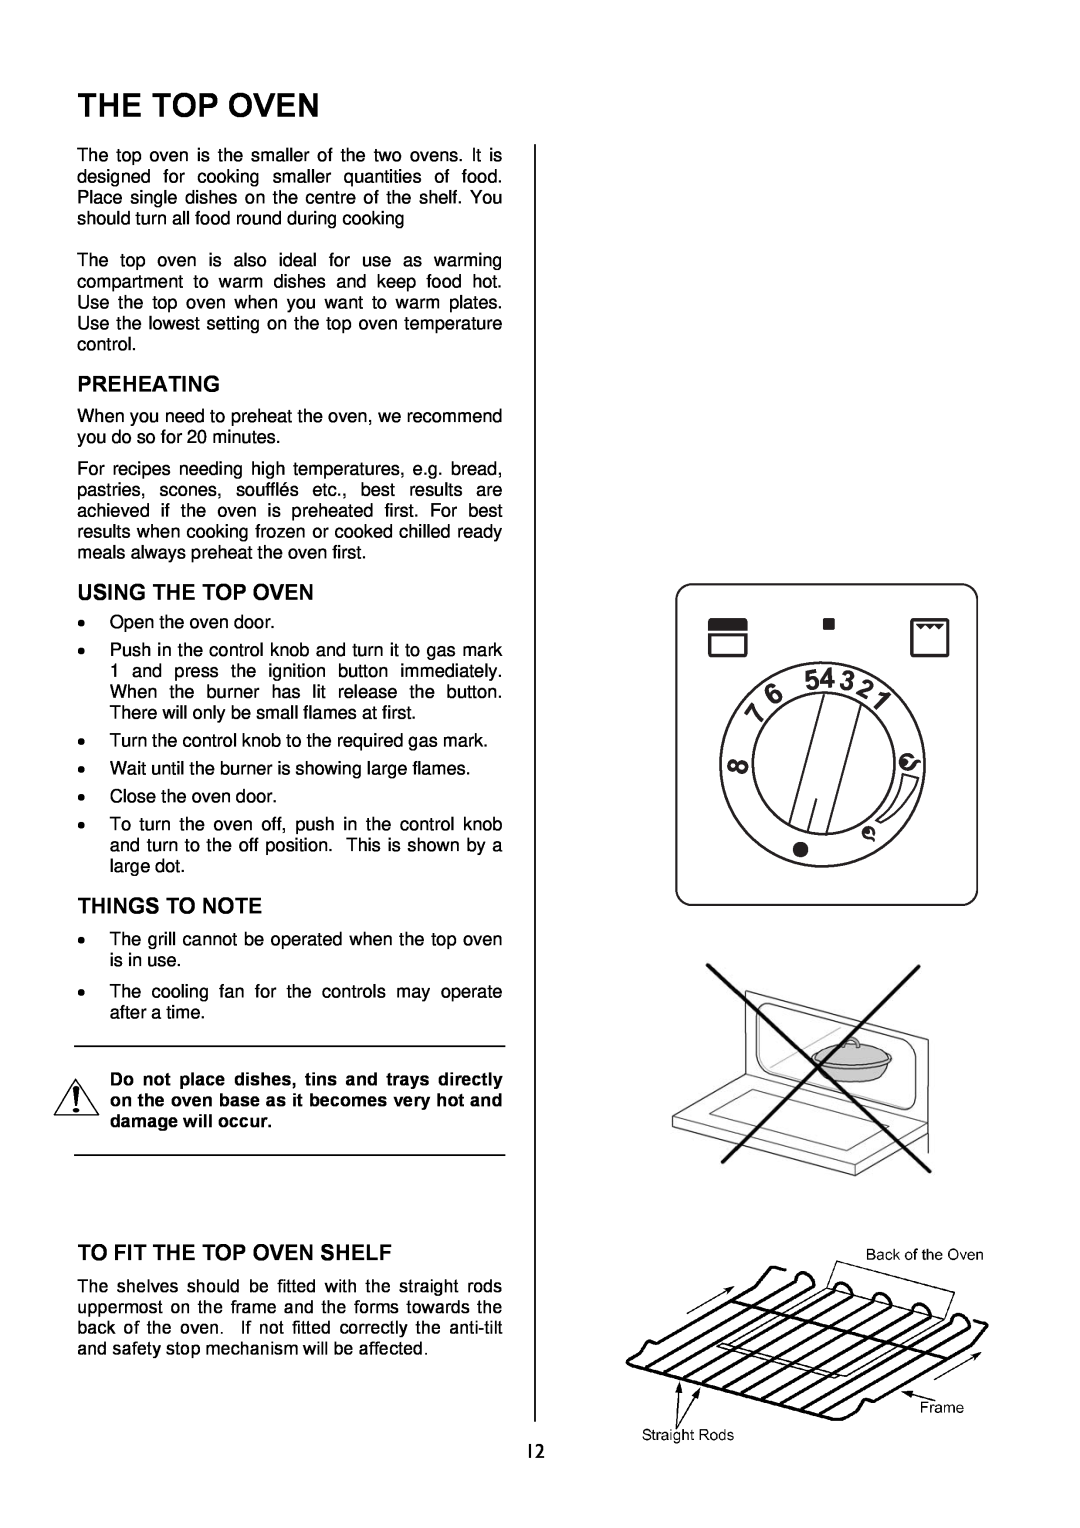 Electrolux EKG5047, EKG5046 manual Preheating, Using The Top Oven, To Fit The Top Oven Shelf, Things To Note 